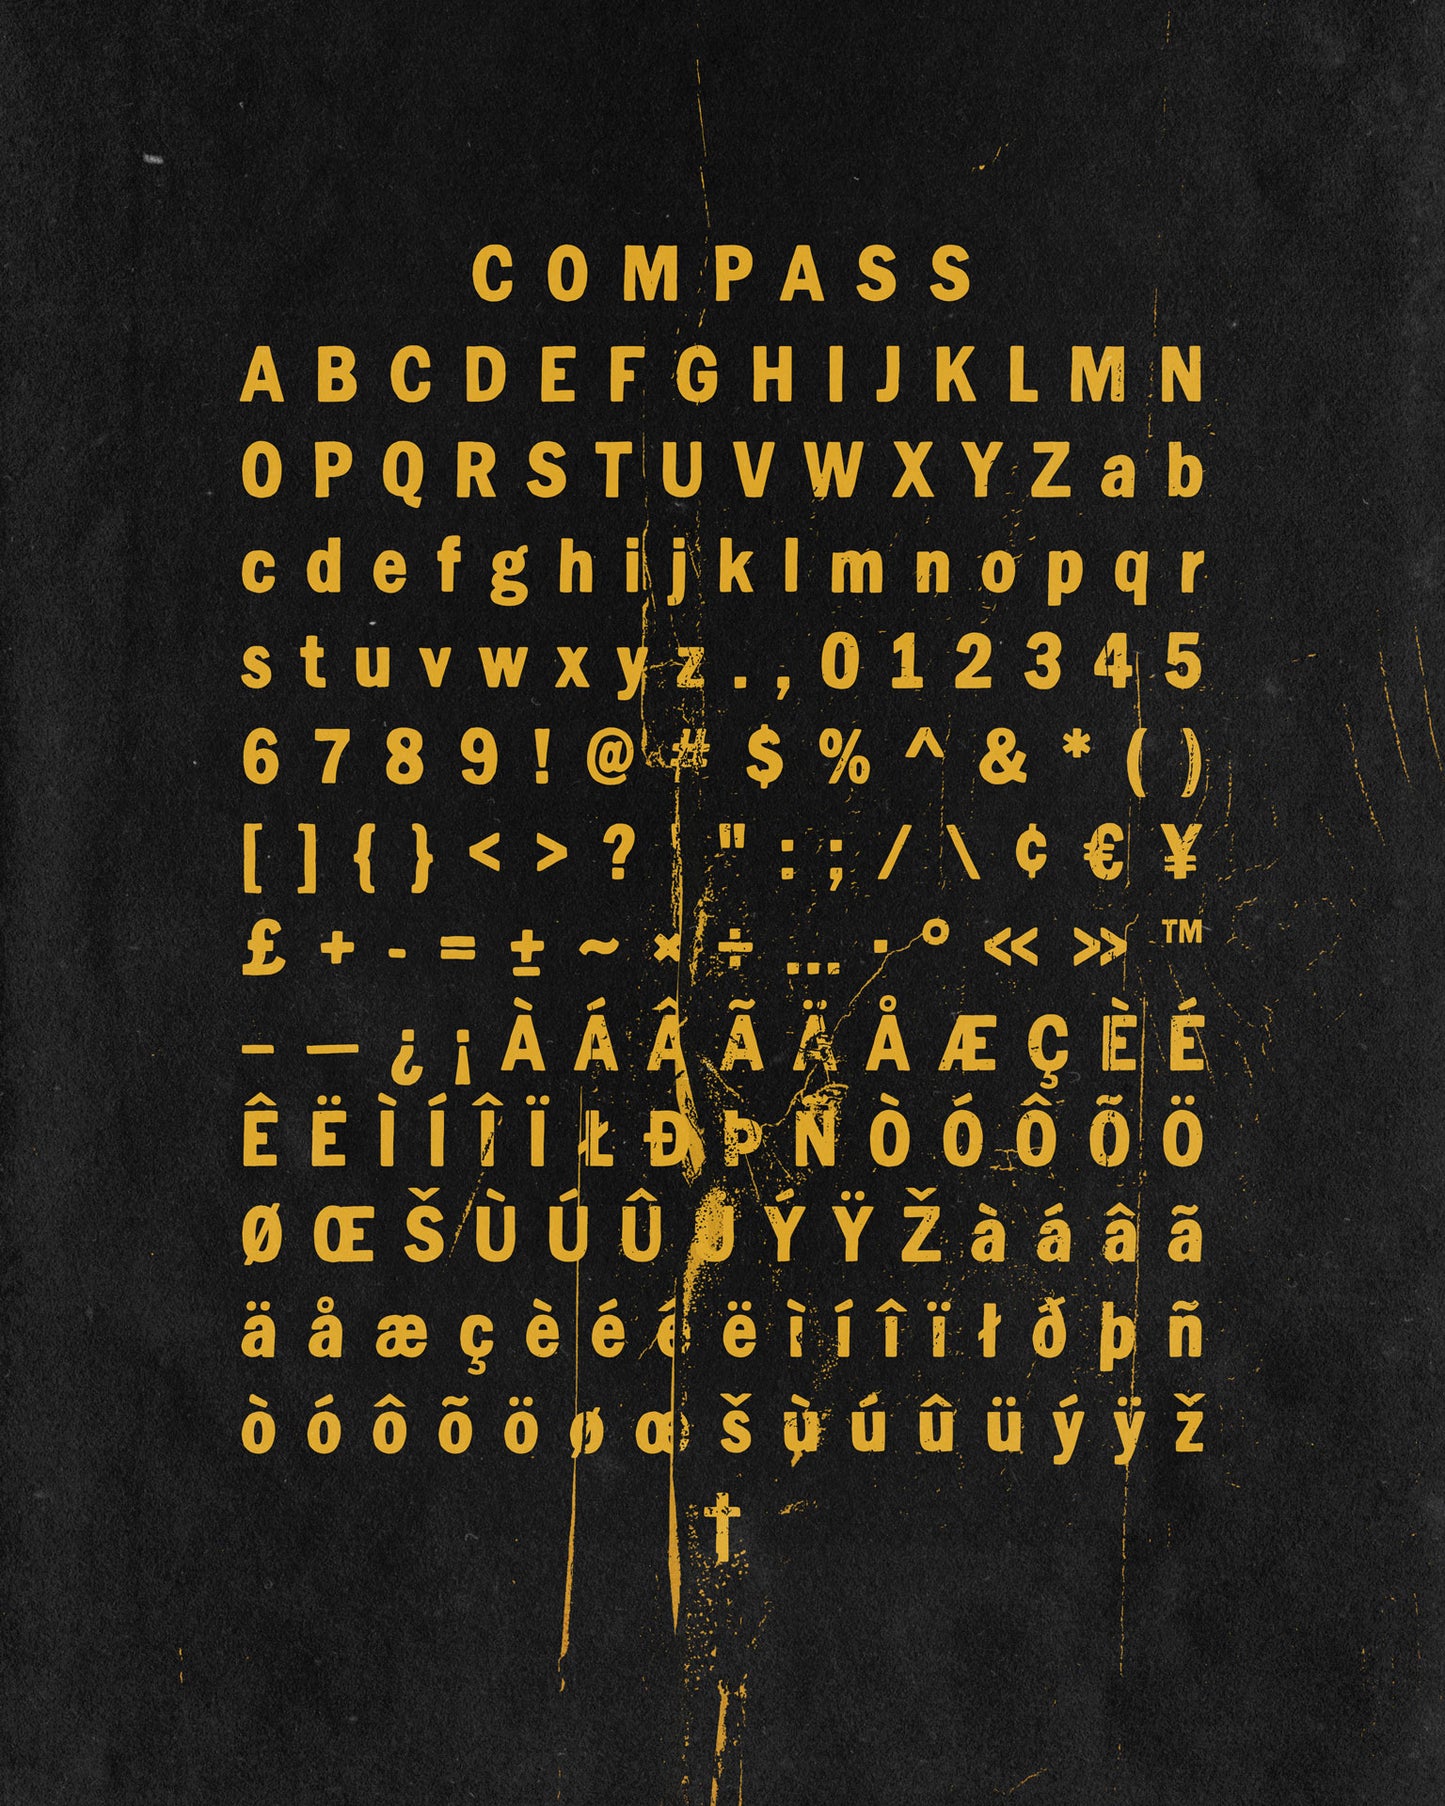 Compass Font by 1924us